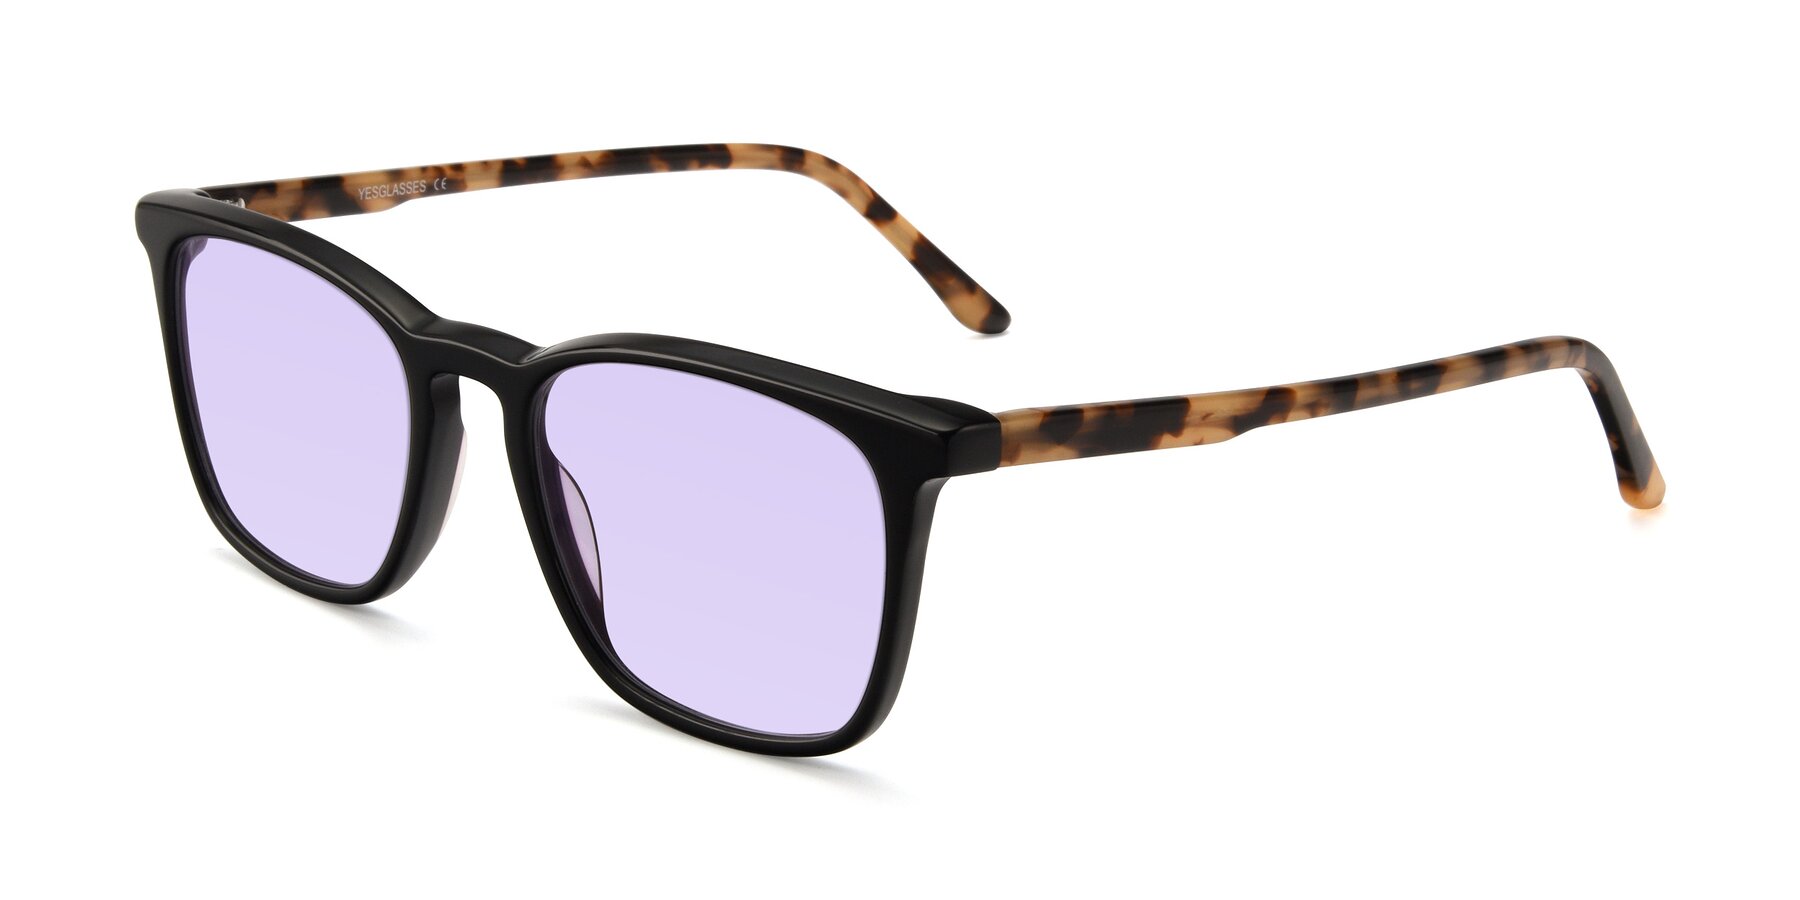 Angle of Vigor in Black-Tortoise with Light Purple Tinted Lenses